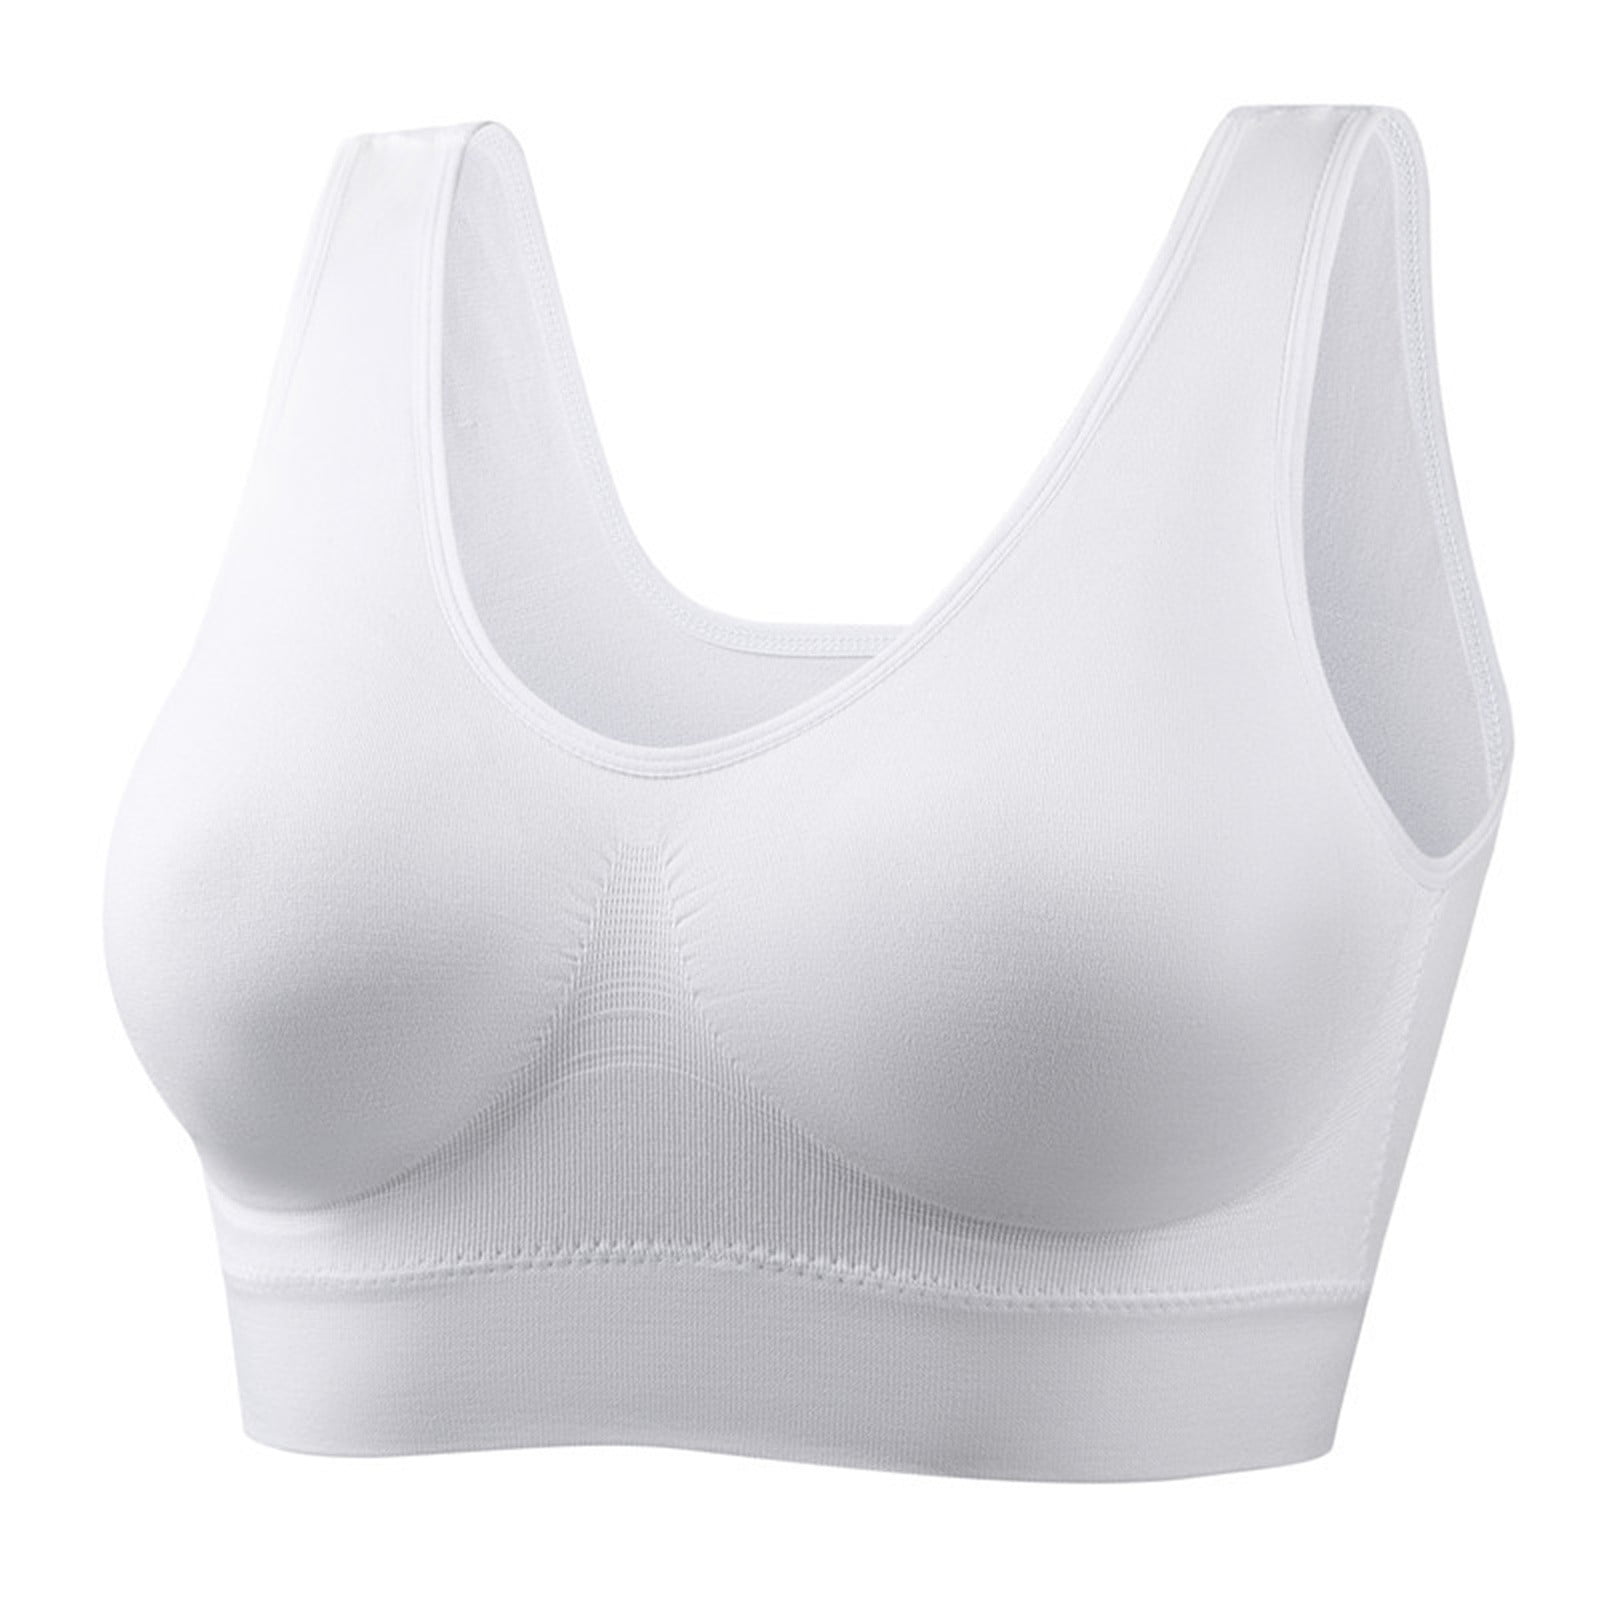 Knosfe Sexy Bra Wireless Bras for Large Breasted Women High